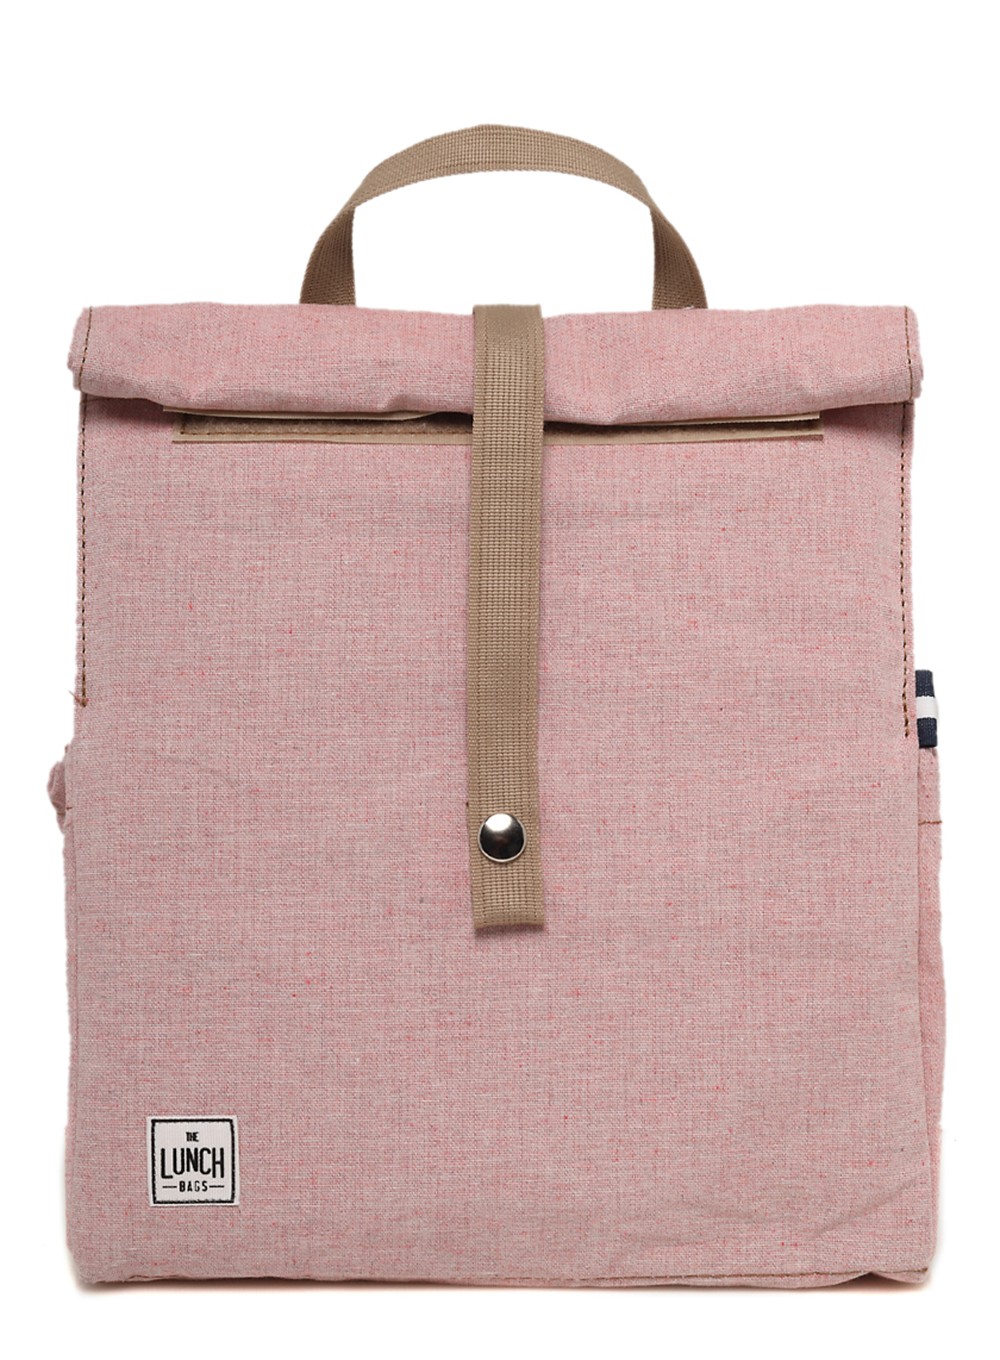 Plecak The Lunch Bags Lunchpack - rose